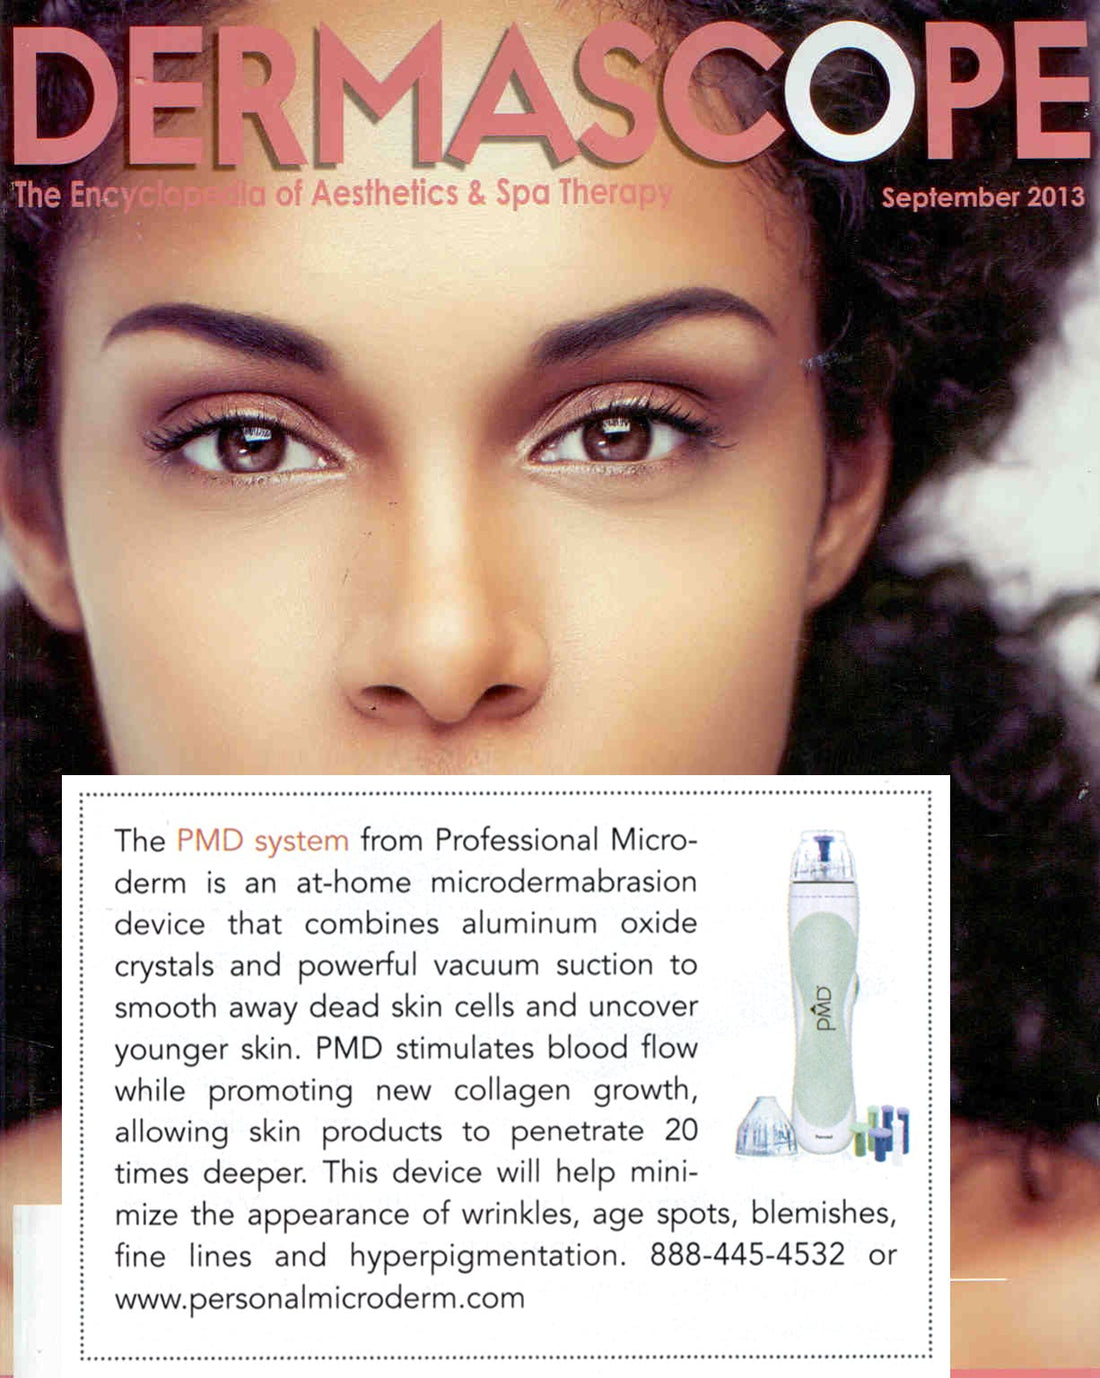 Dermascope Magazine featuring the PMD Personal Microderm